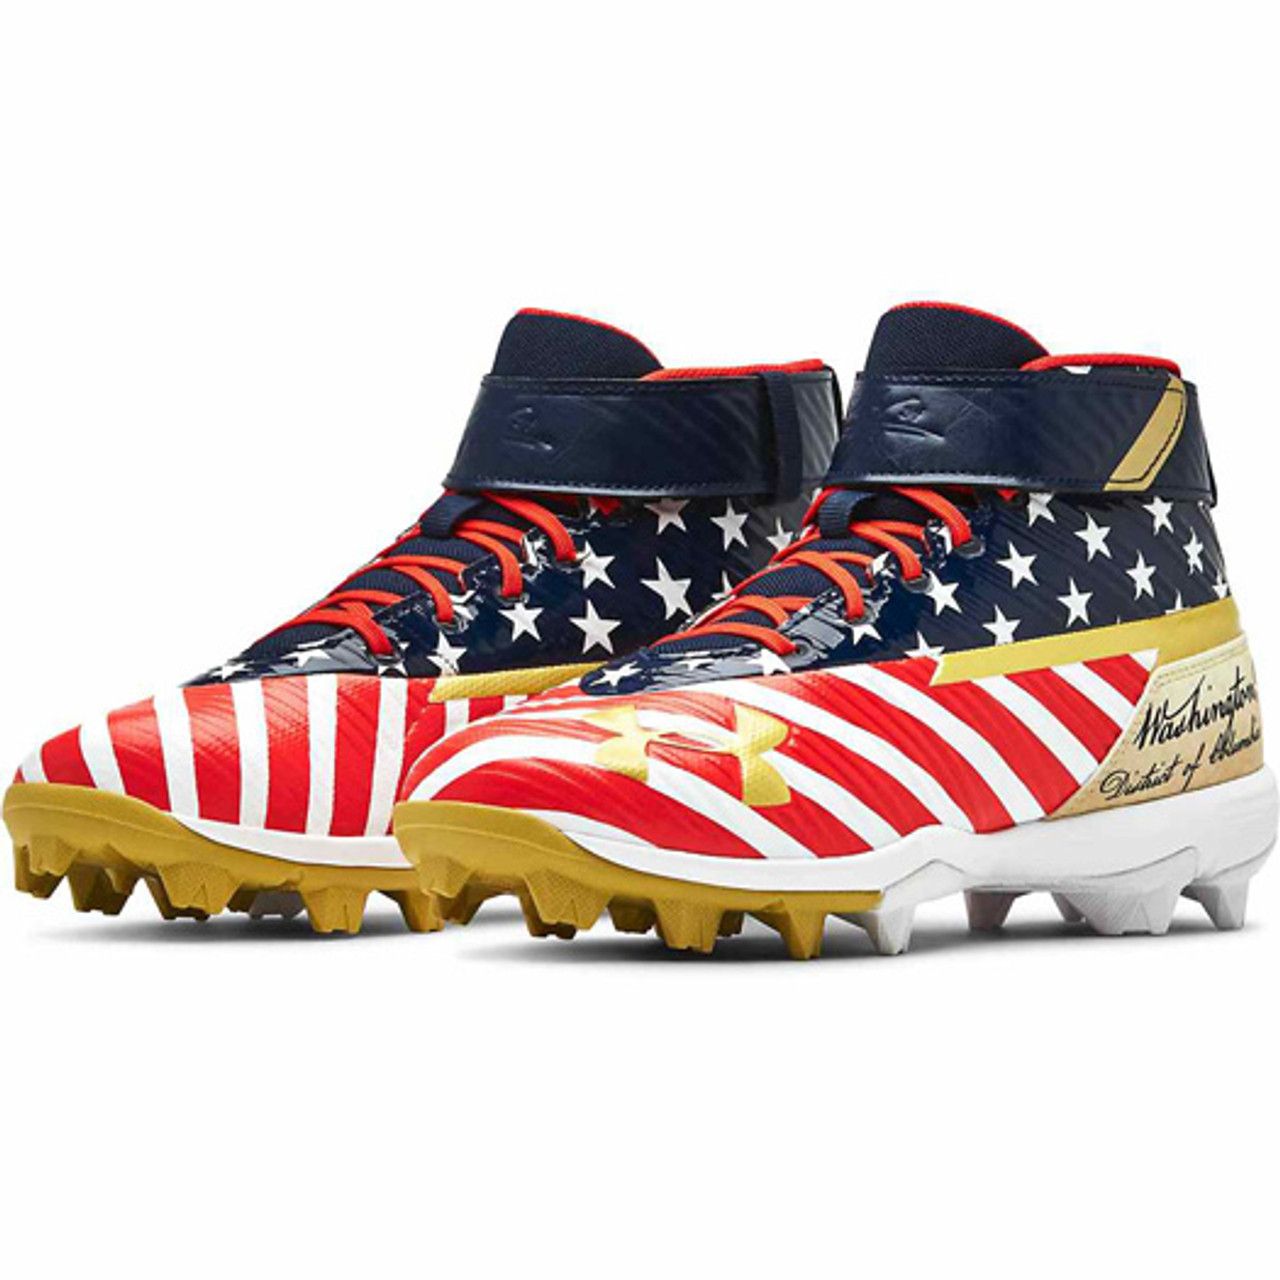 Under Armour Limited Edition Bryce 